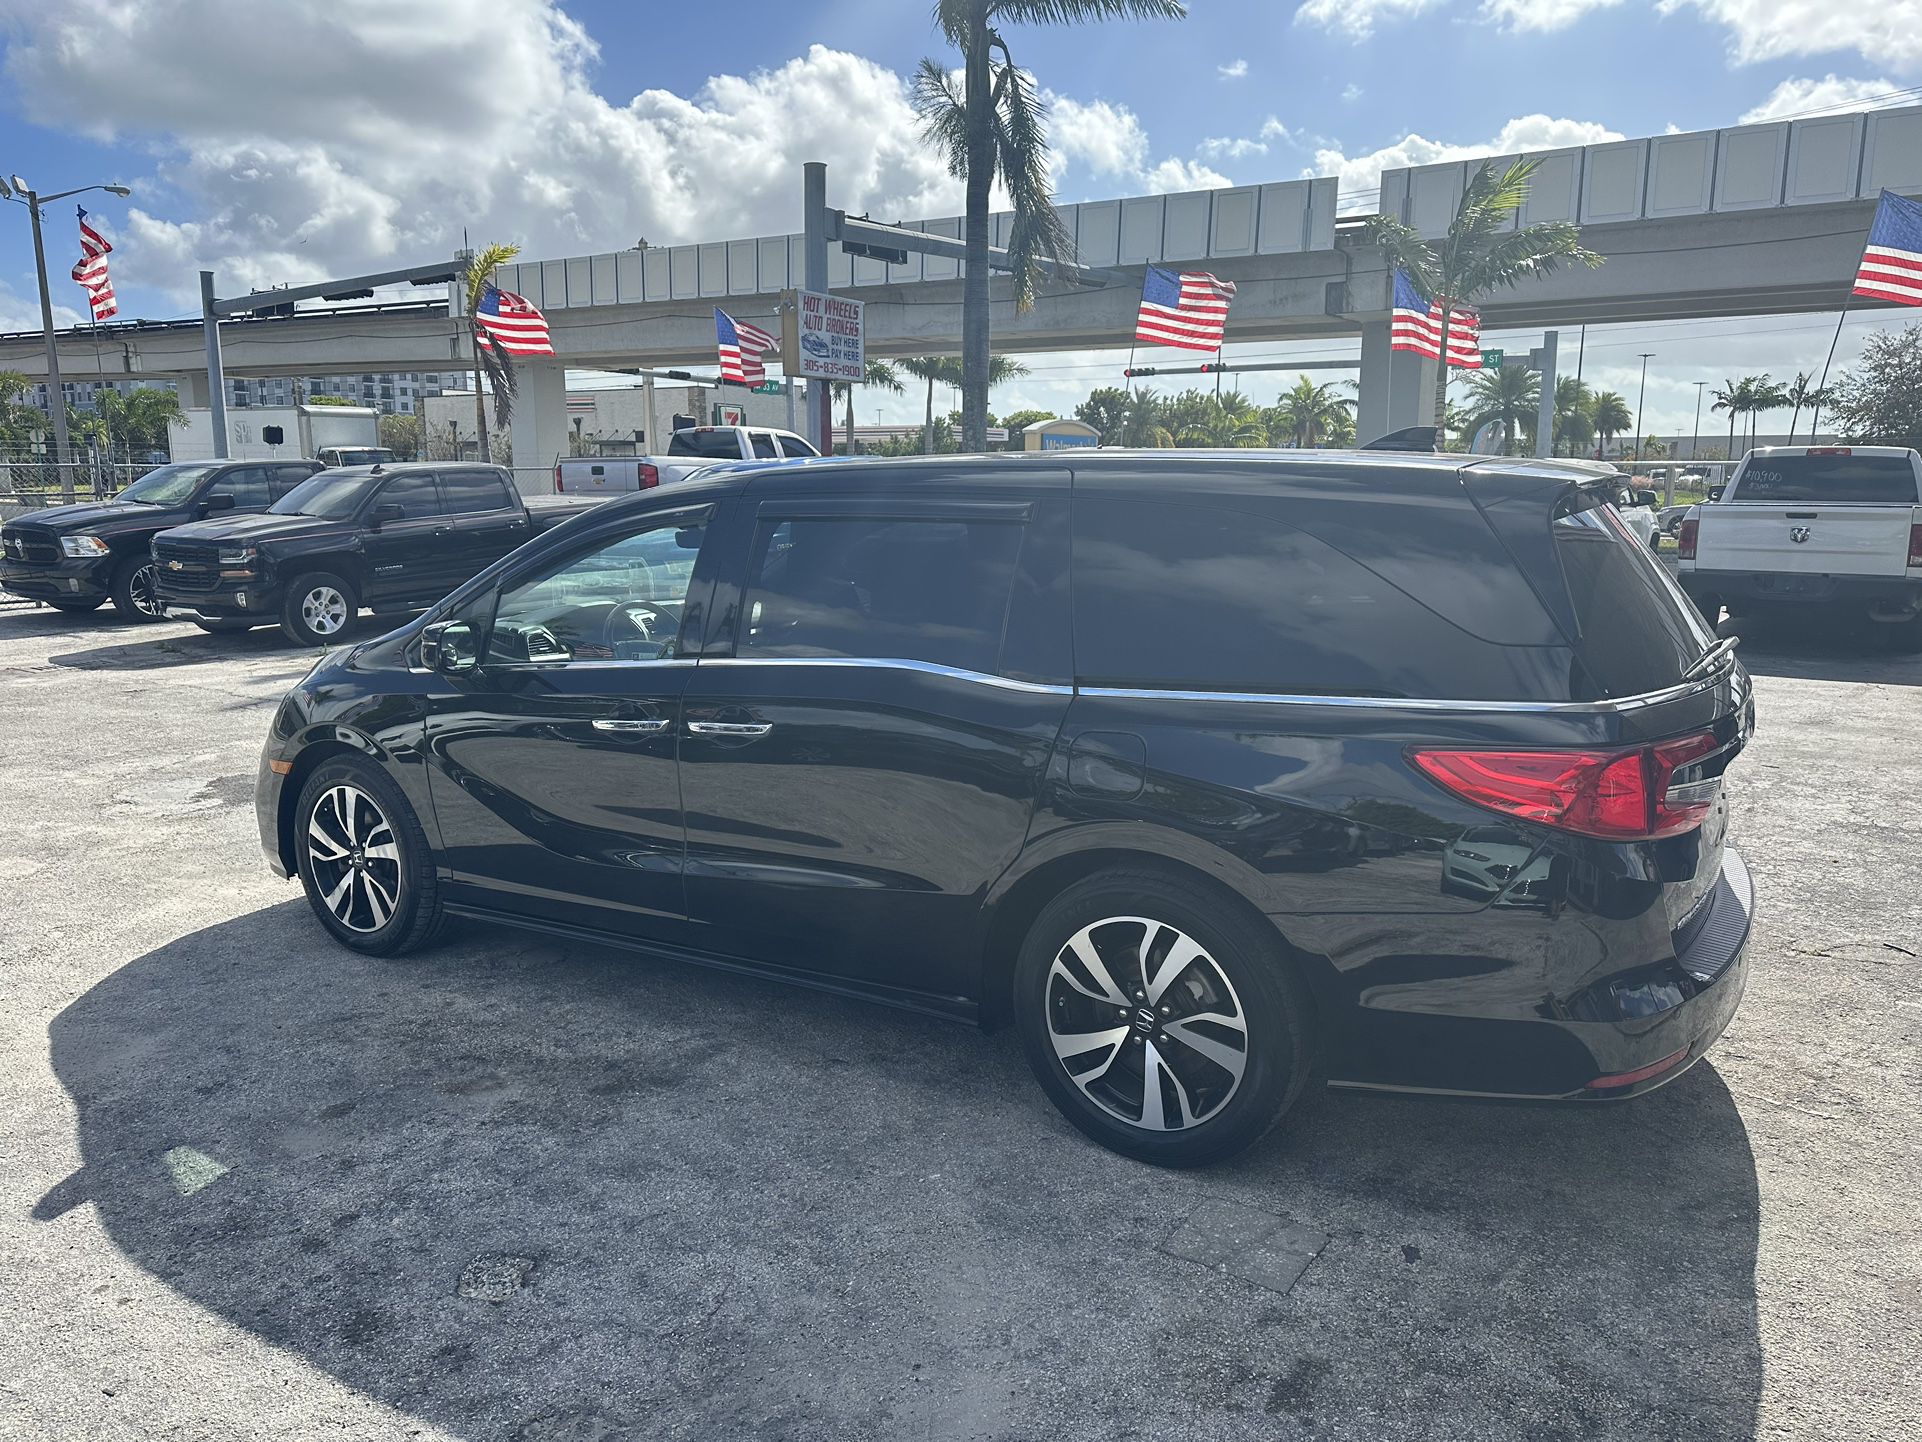 used 2018 HONDA ODOSSEY - front view 3